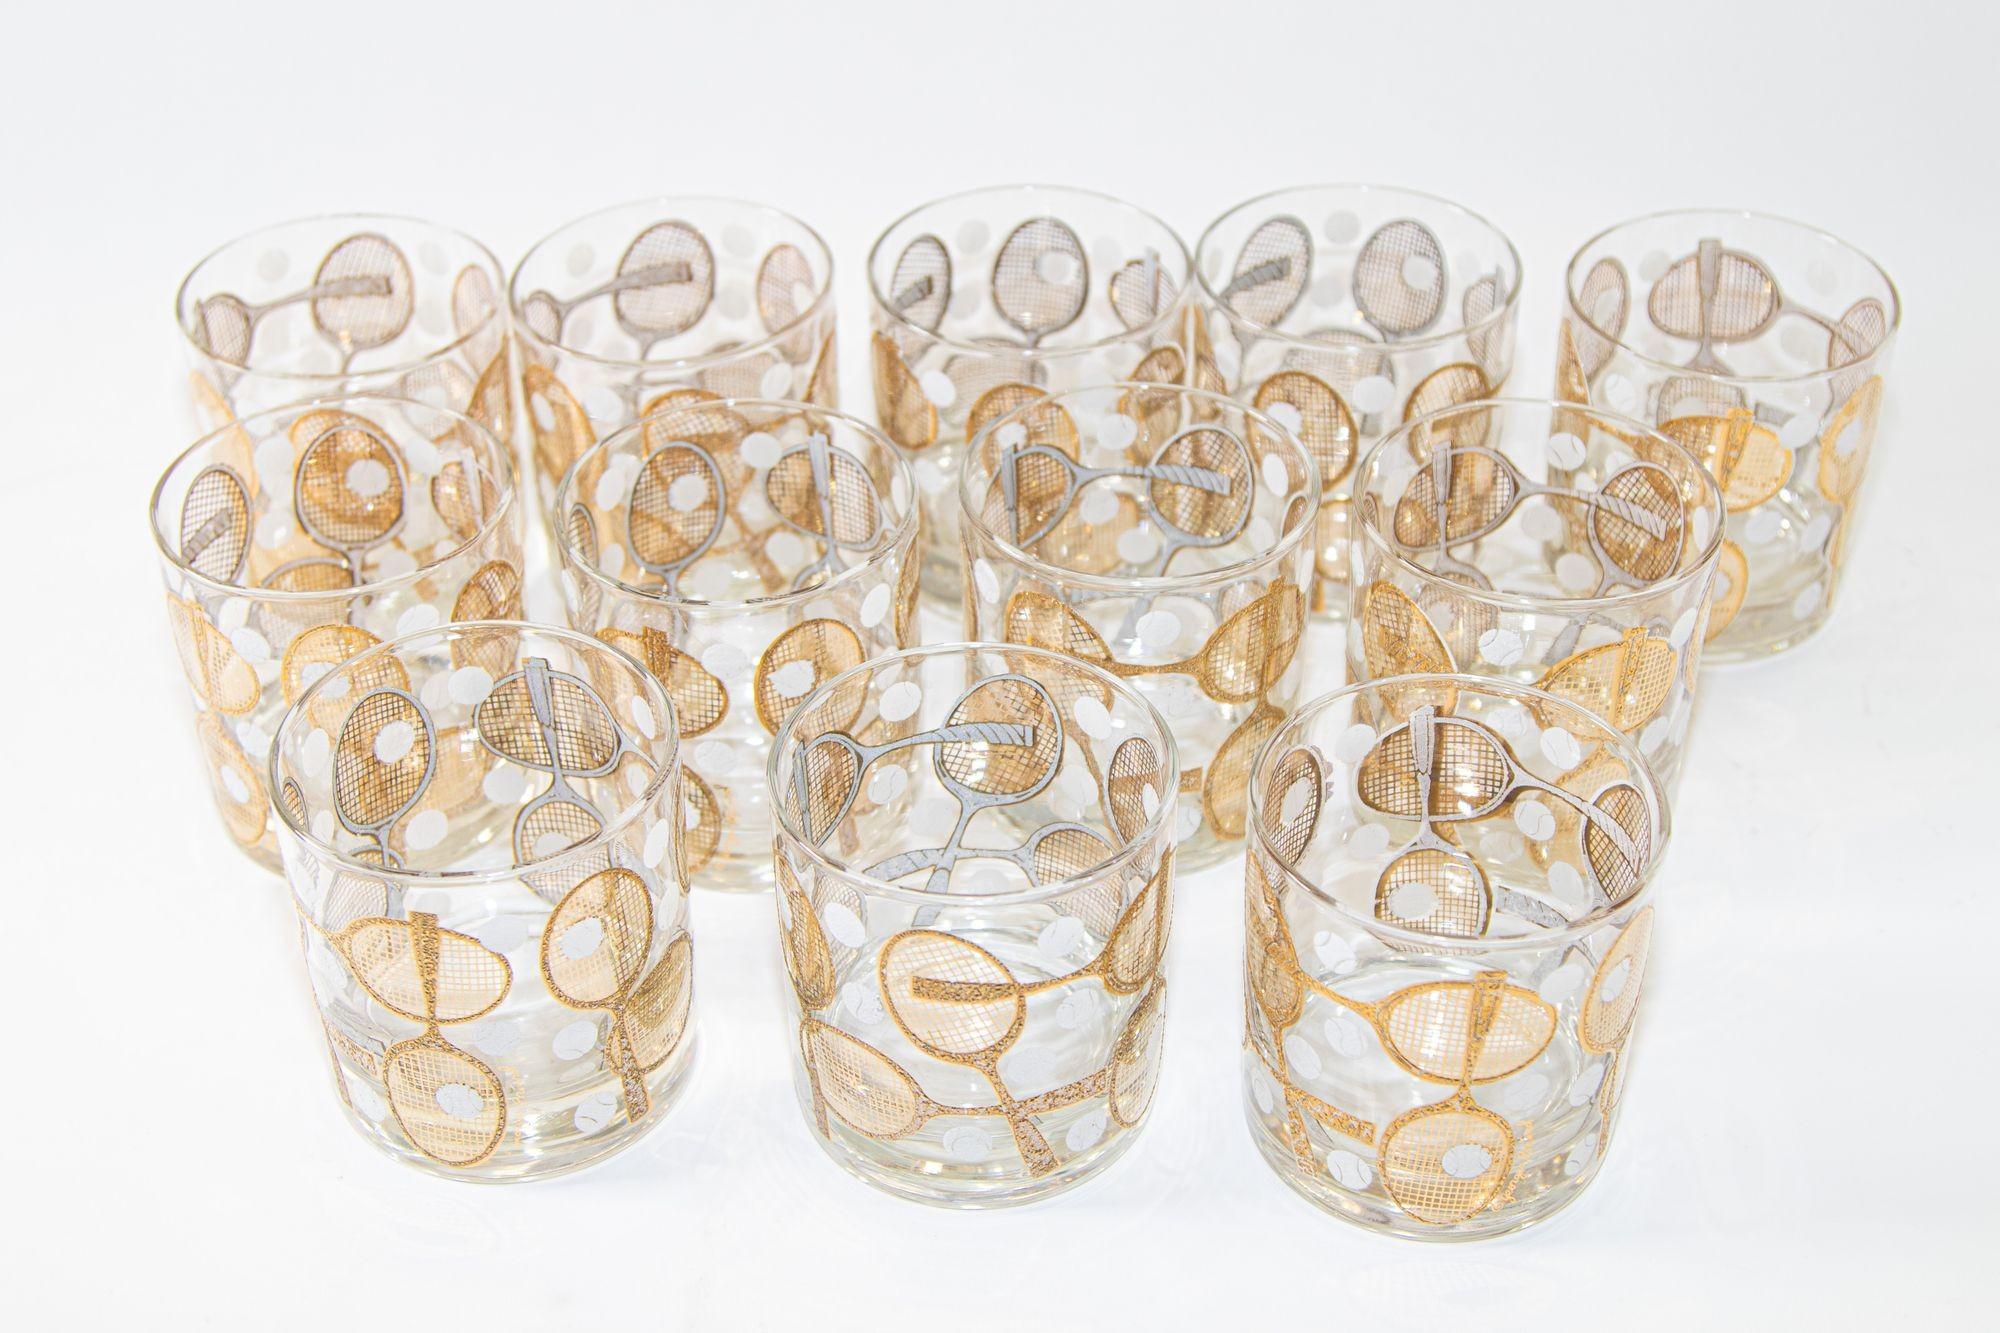 Vintage signed Georges Briard barware lowball glasses with tennis rackets & tennis ball motif set of 12.
Super rare mid-20th century set of twelve rocks glasses designed and signed by Georges Briard, decorated with tennis racquets overlaid with 22